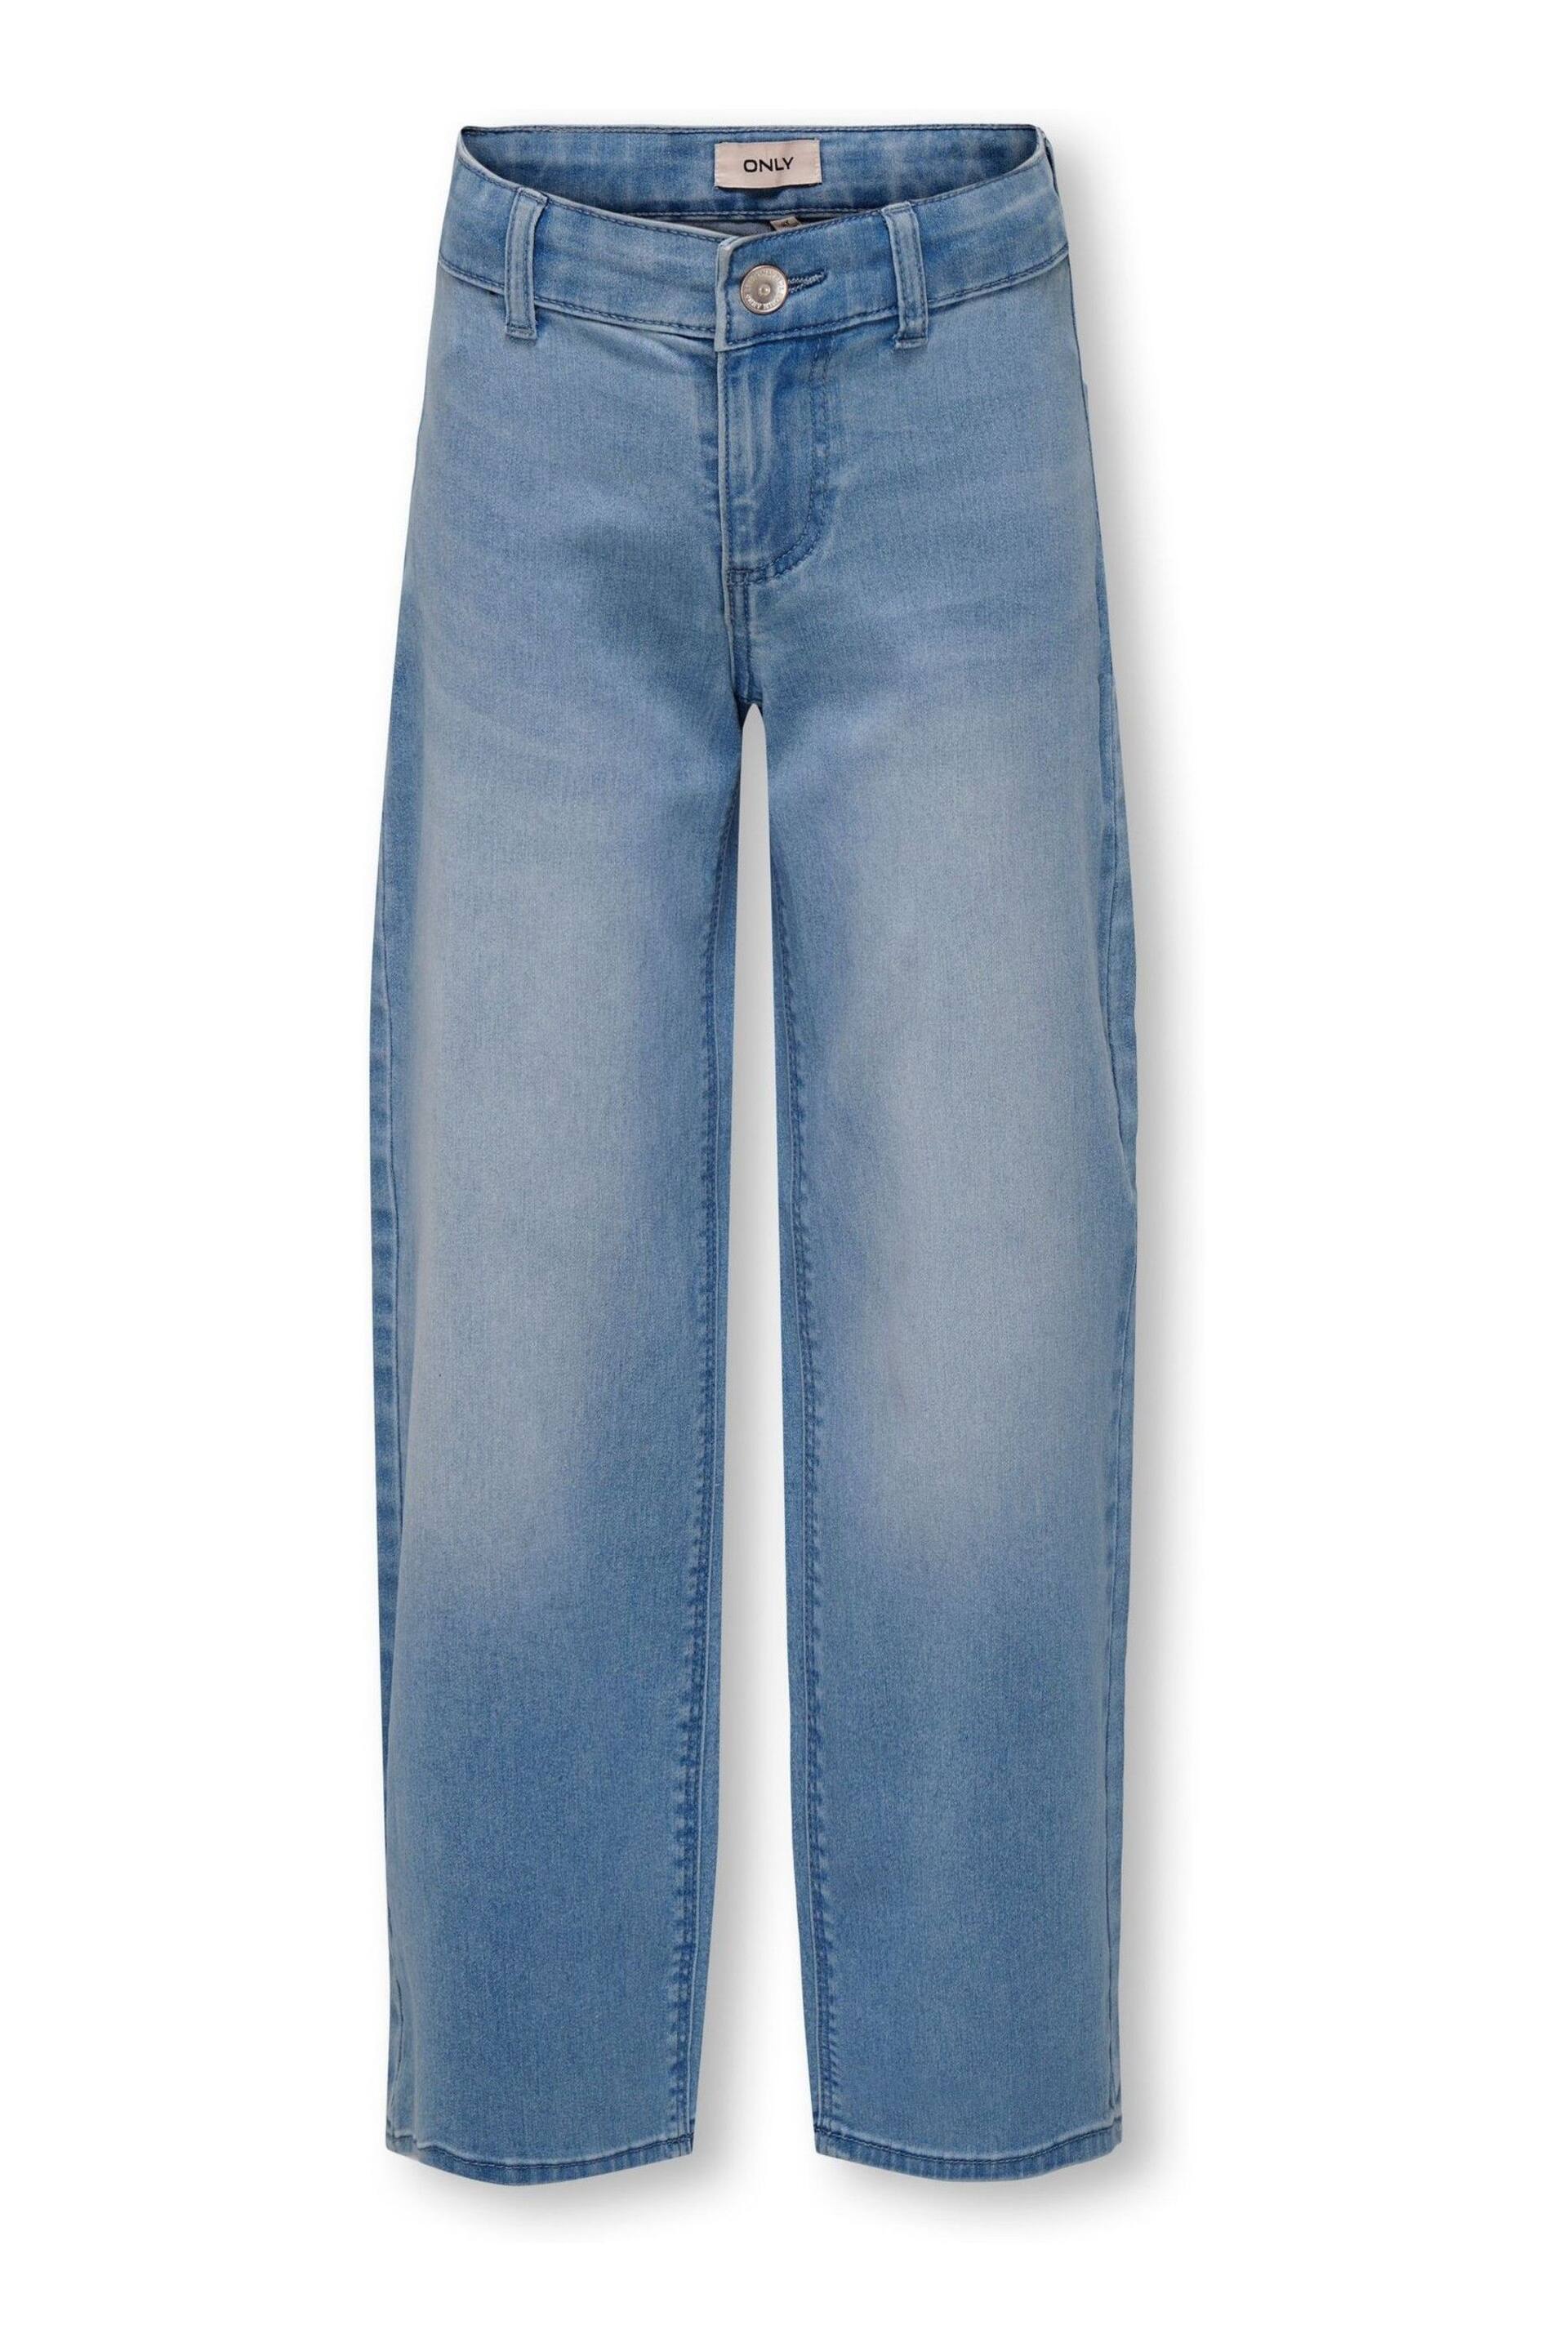 ONLY Blue Wide Leg Stretch Adjustable Waist Jeans - Image 2 of 3